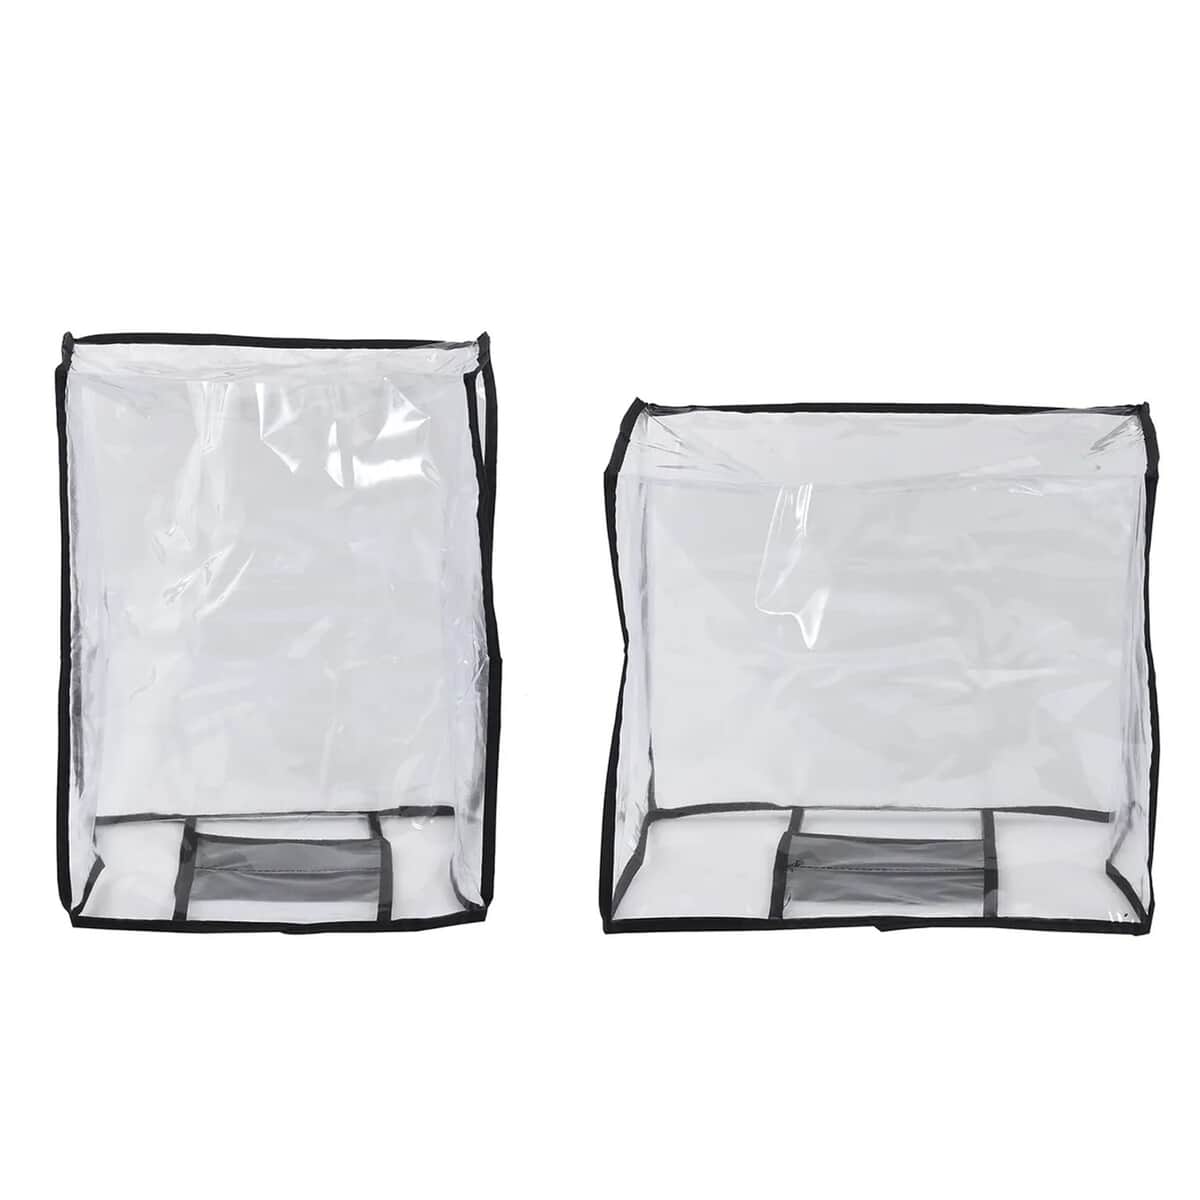 Set of 2 Transparent Waterproof Luggage Cover (18"+20") image number 4